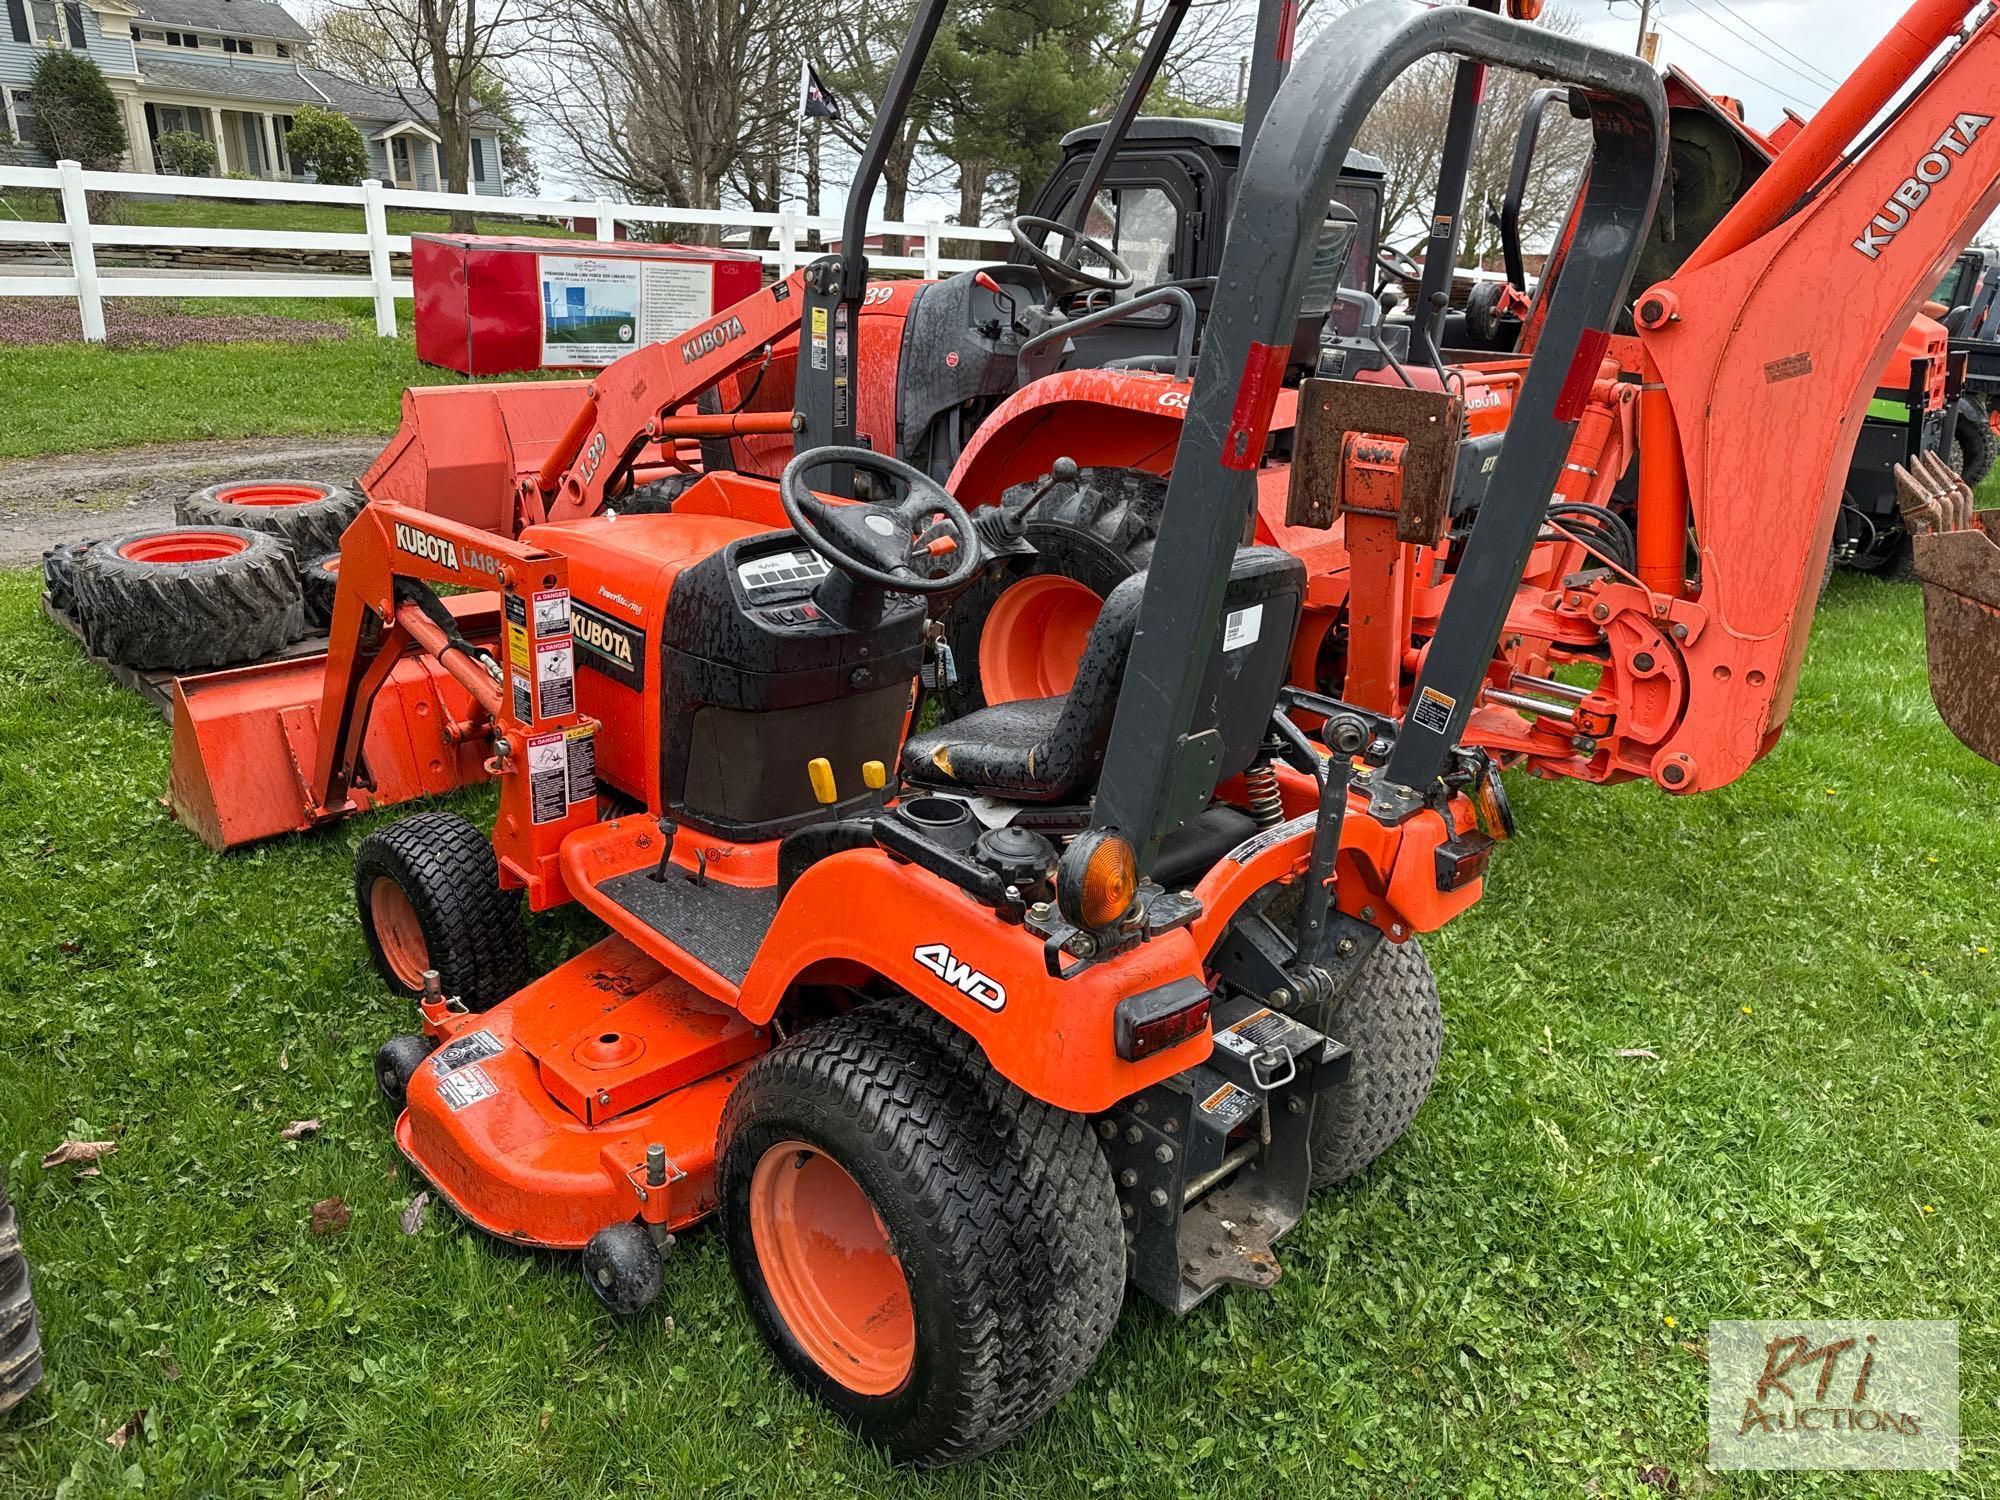 Kubota BX1500 4WD compact diesel tractor, with 54in mower deck, loader, power steering, 835 hrs.